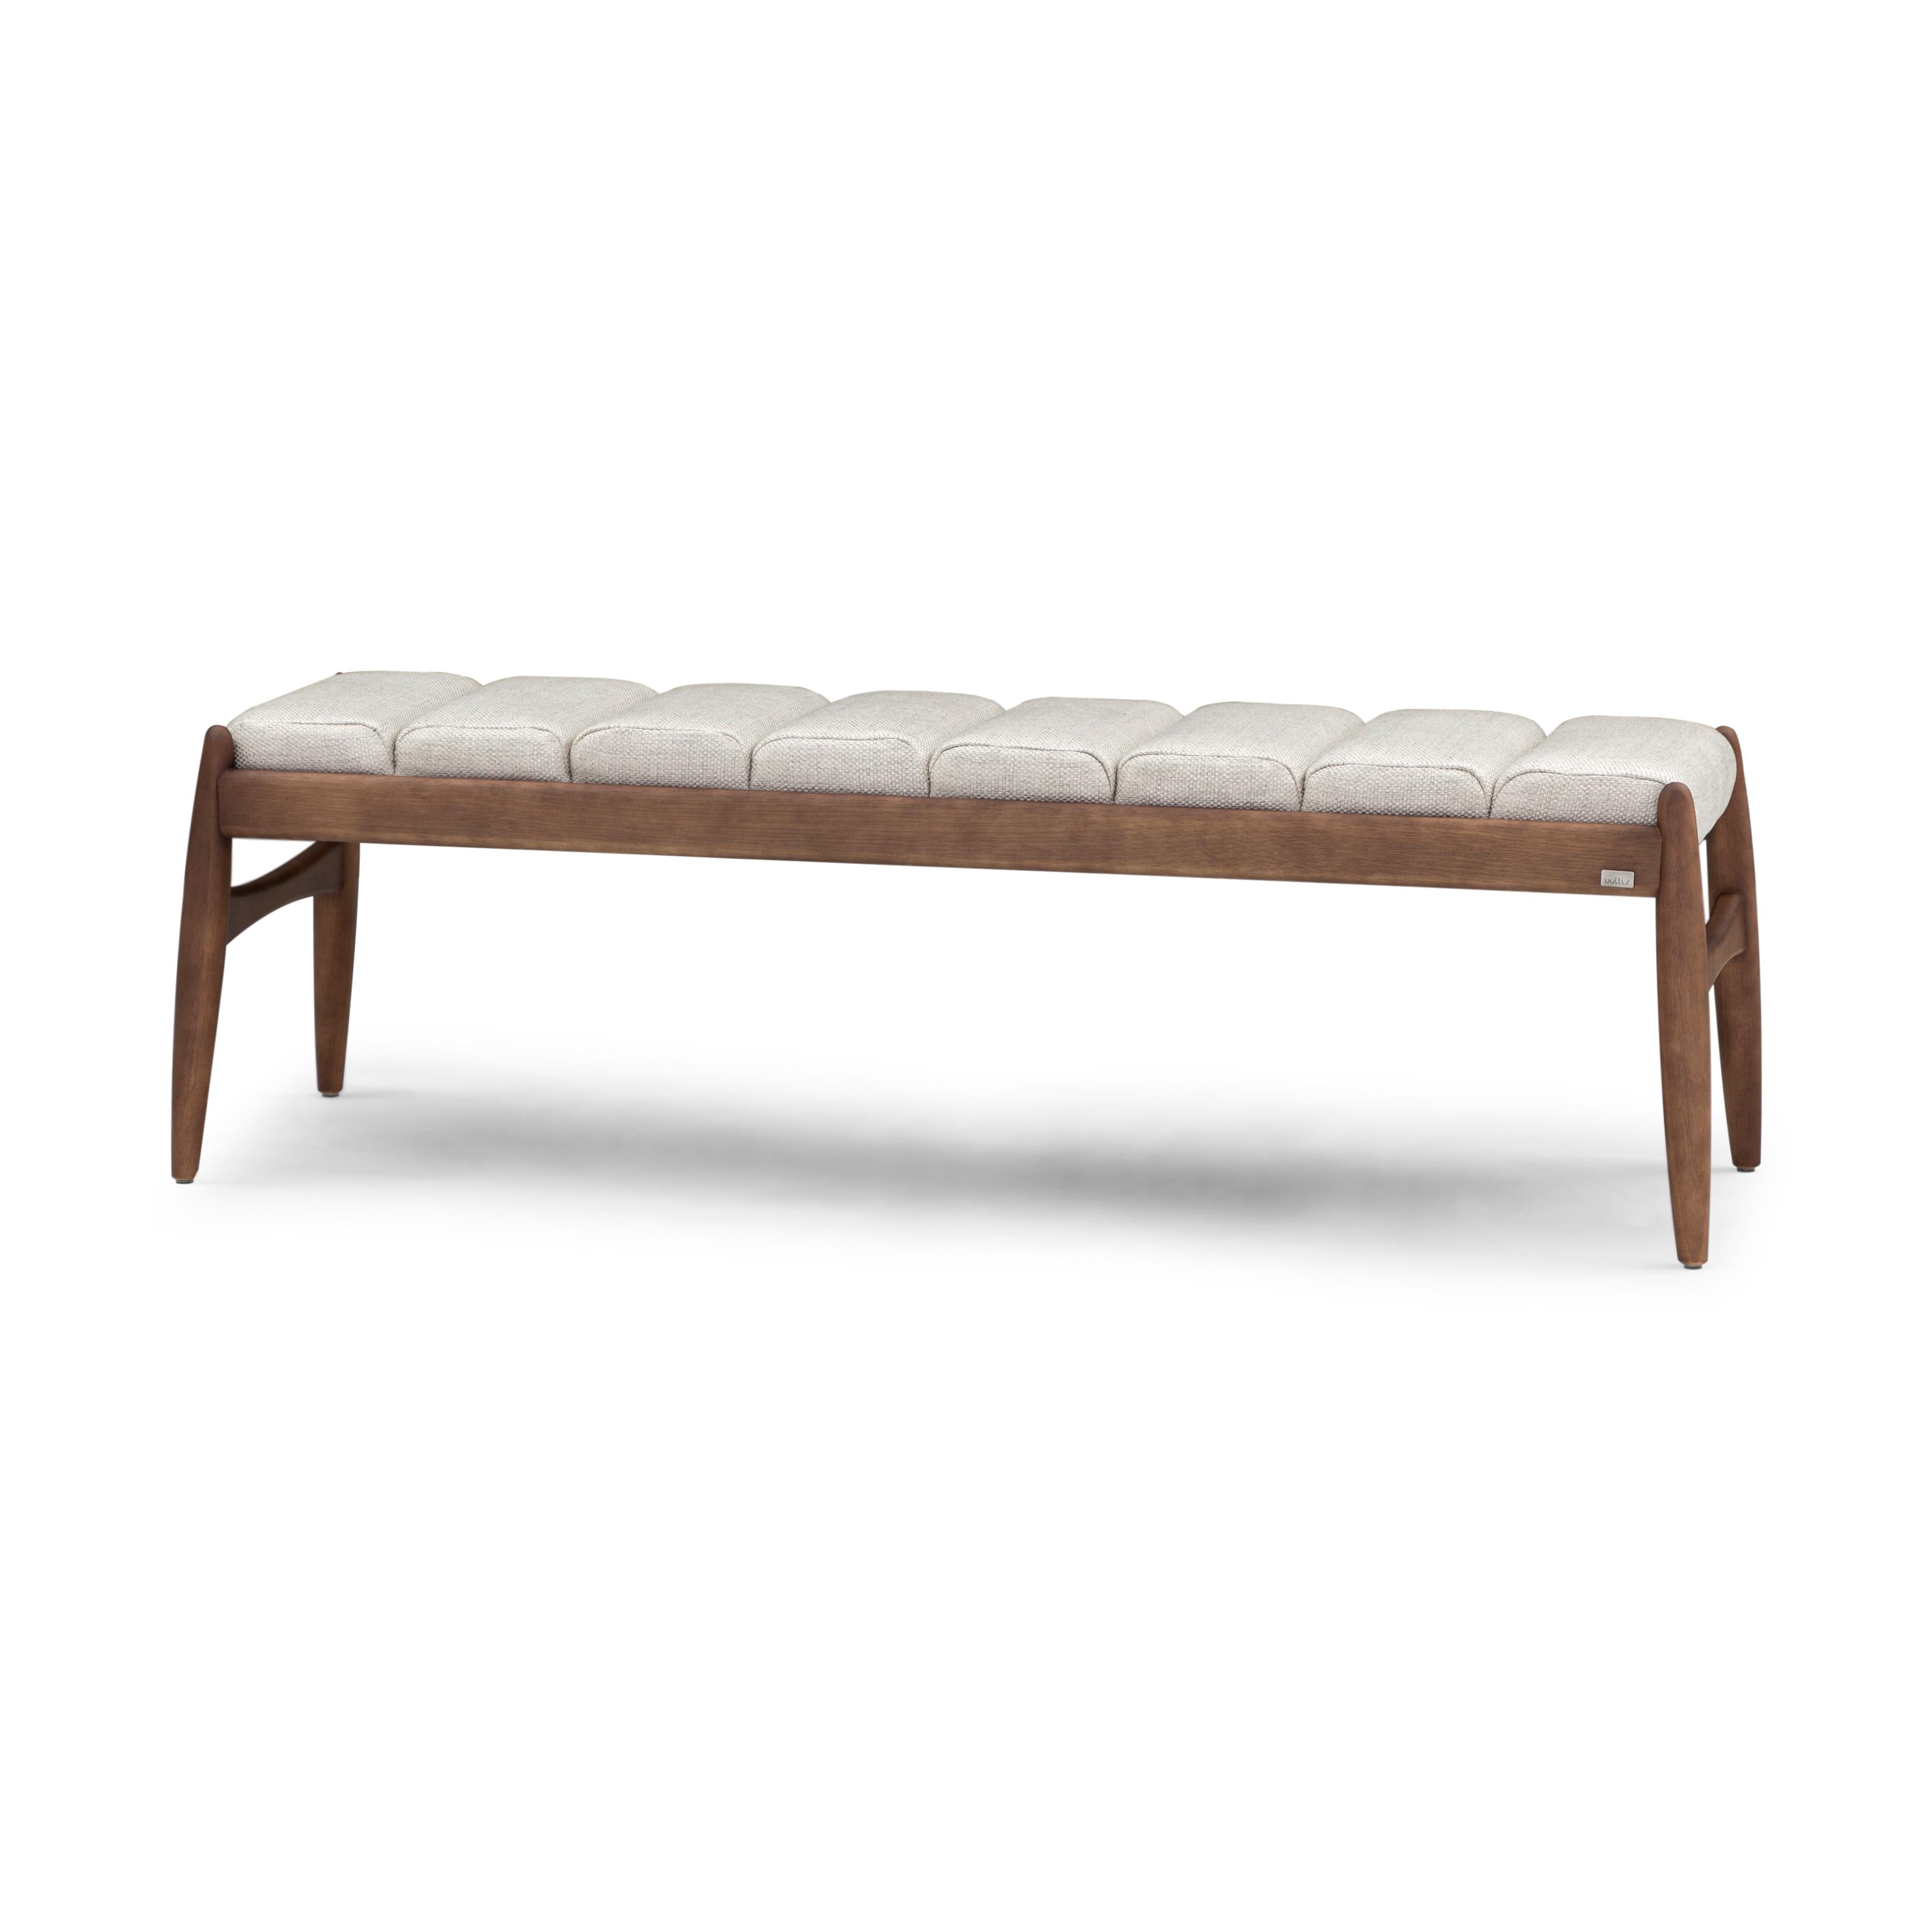 Upholstery Wave Bench in Walnut Wood Finish and Plaid Fabric For Sale